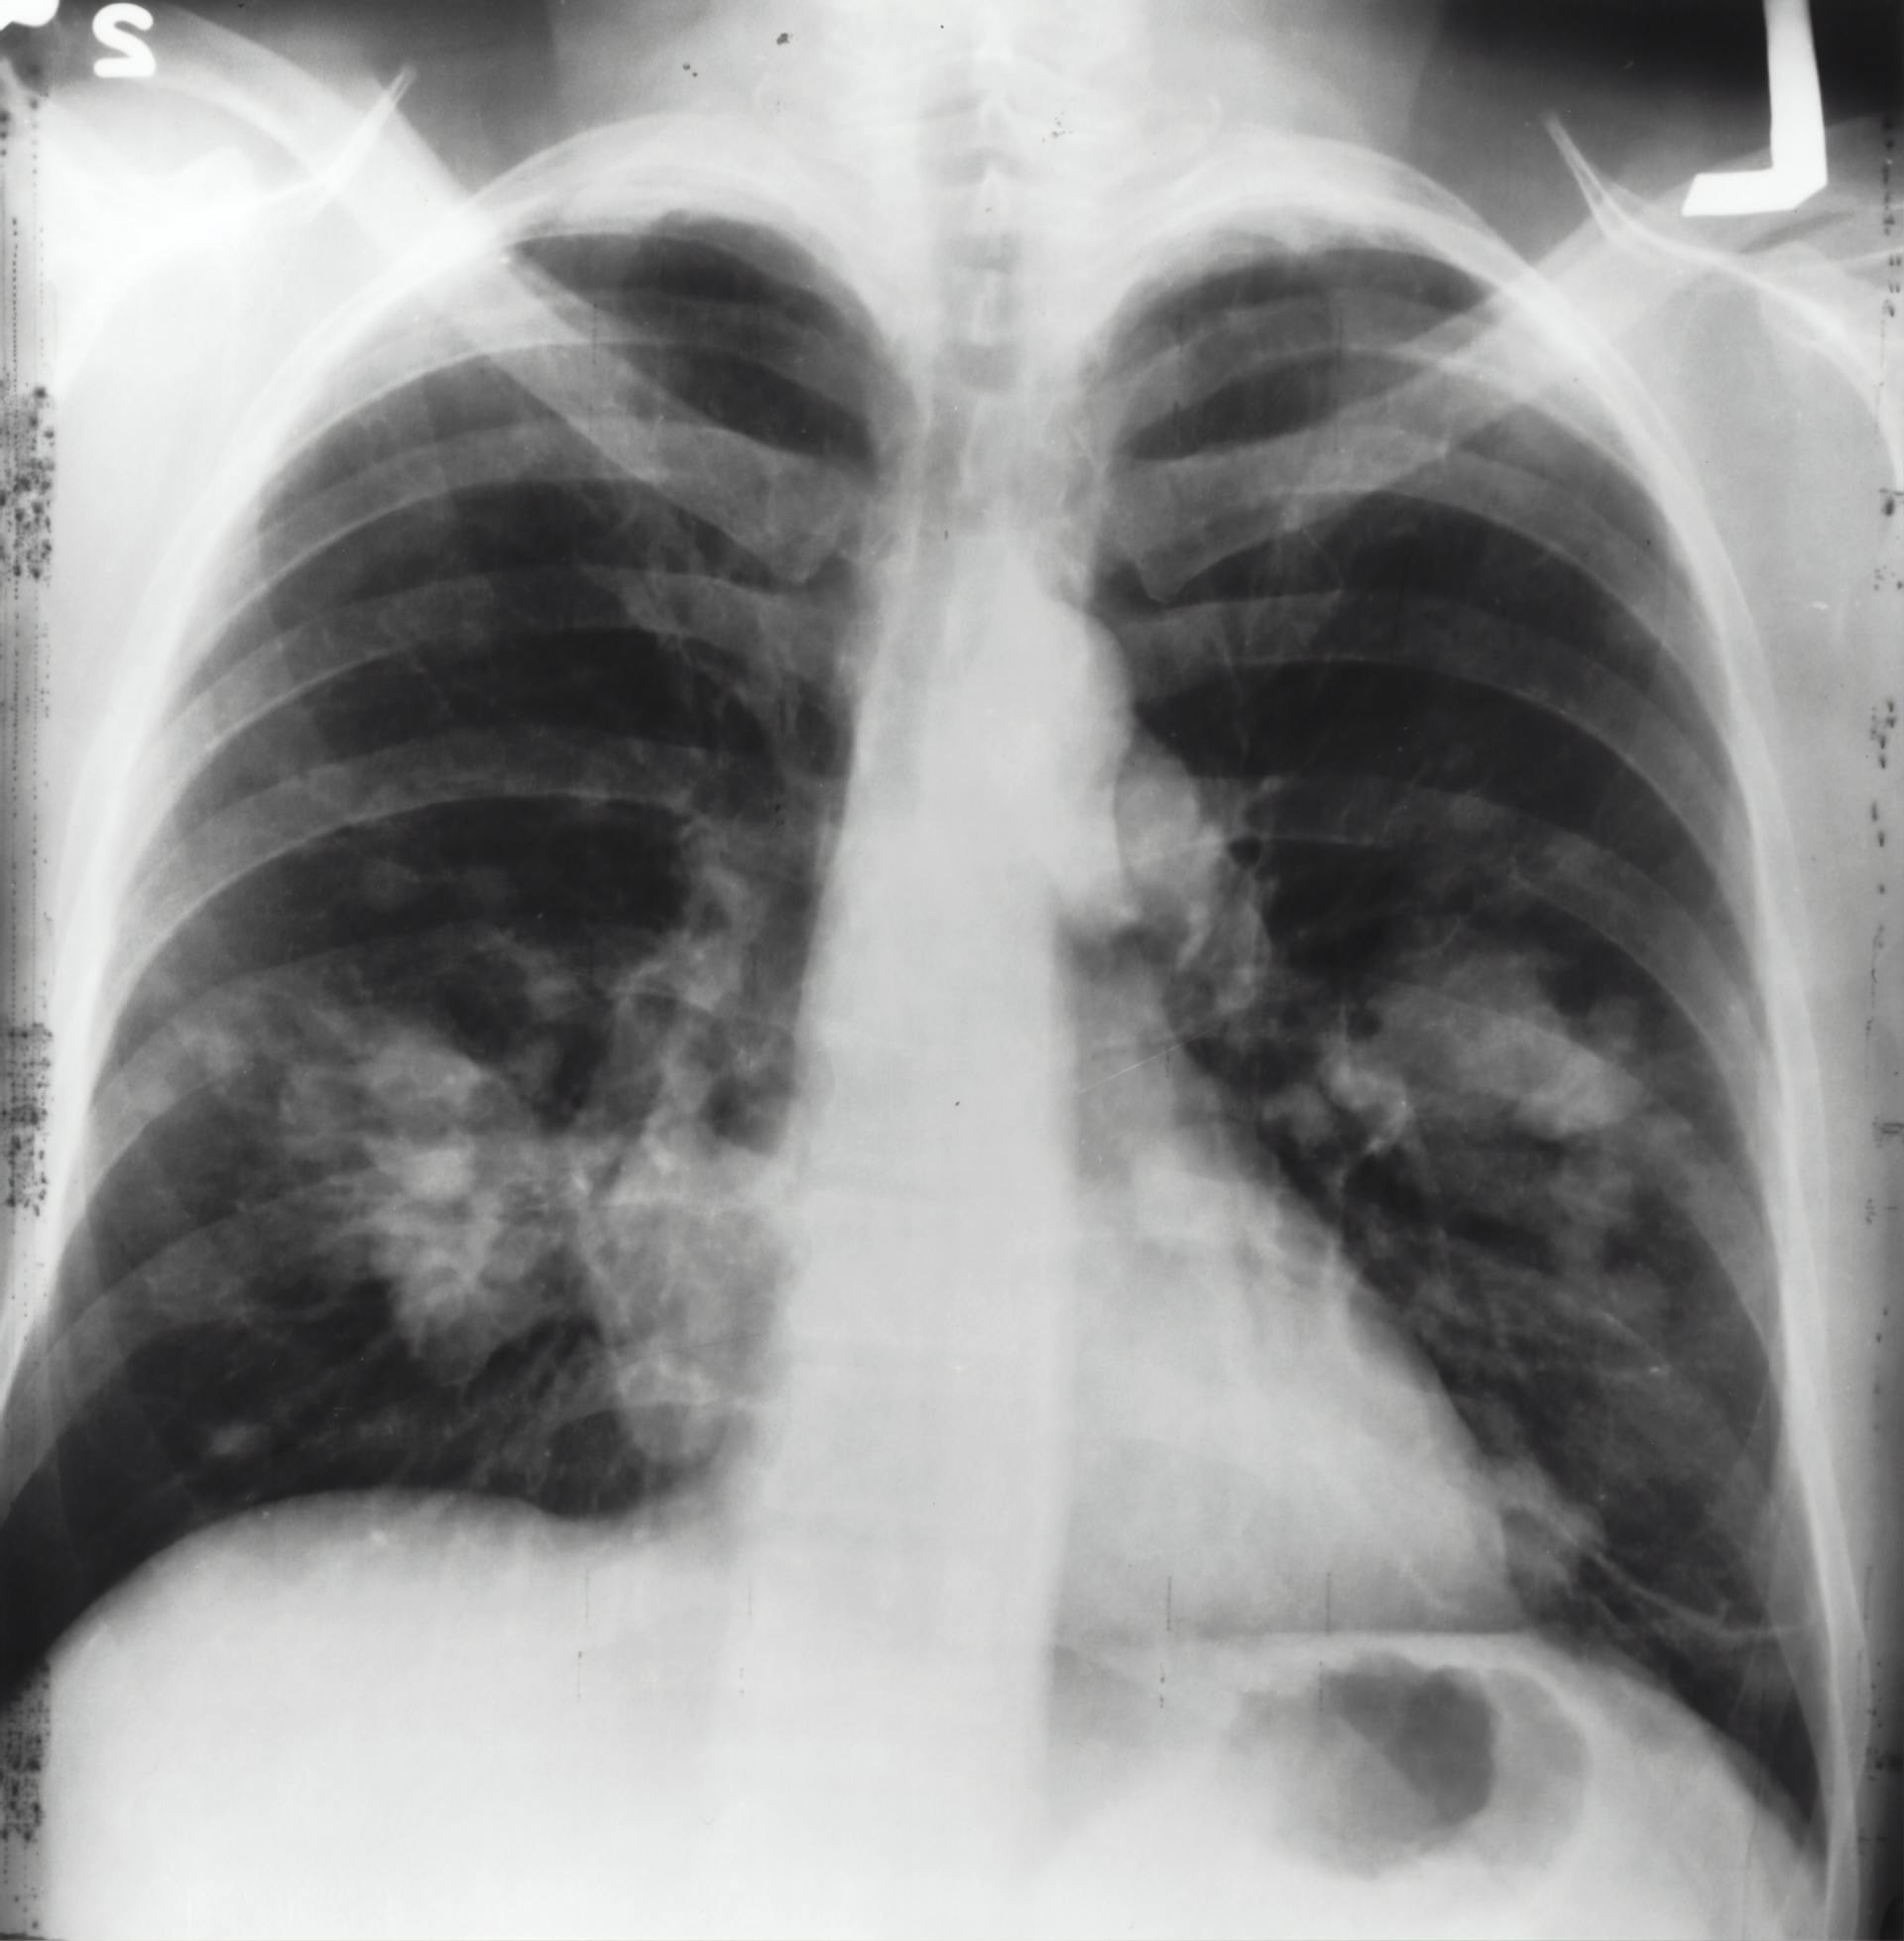 It is a black and white x-ray of a person 's chest.